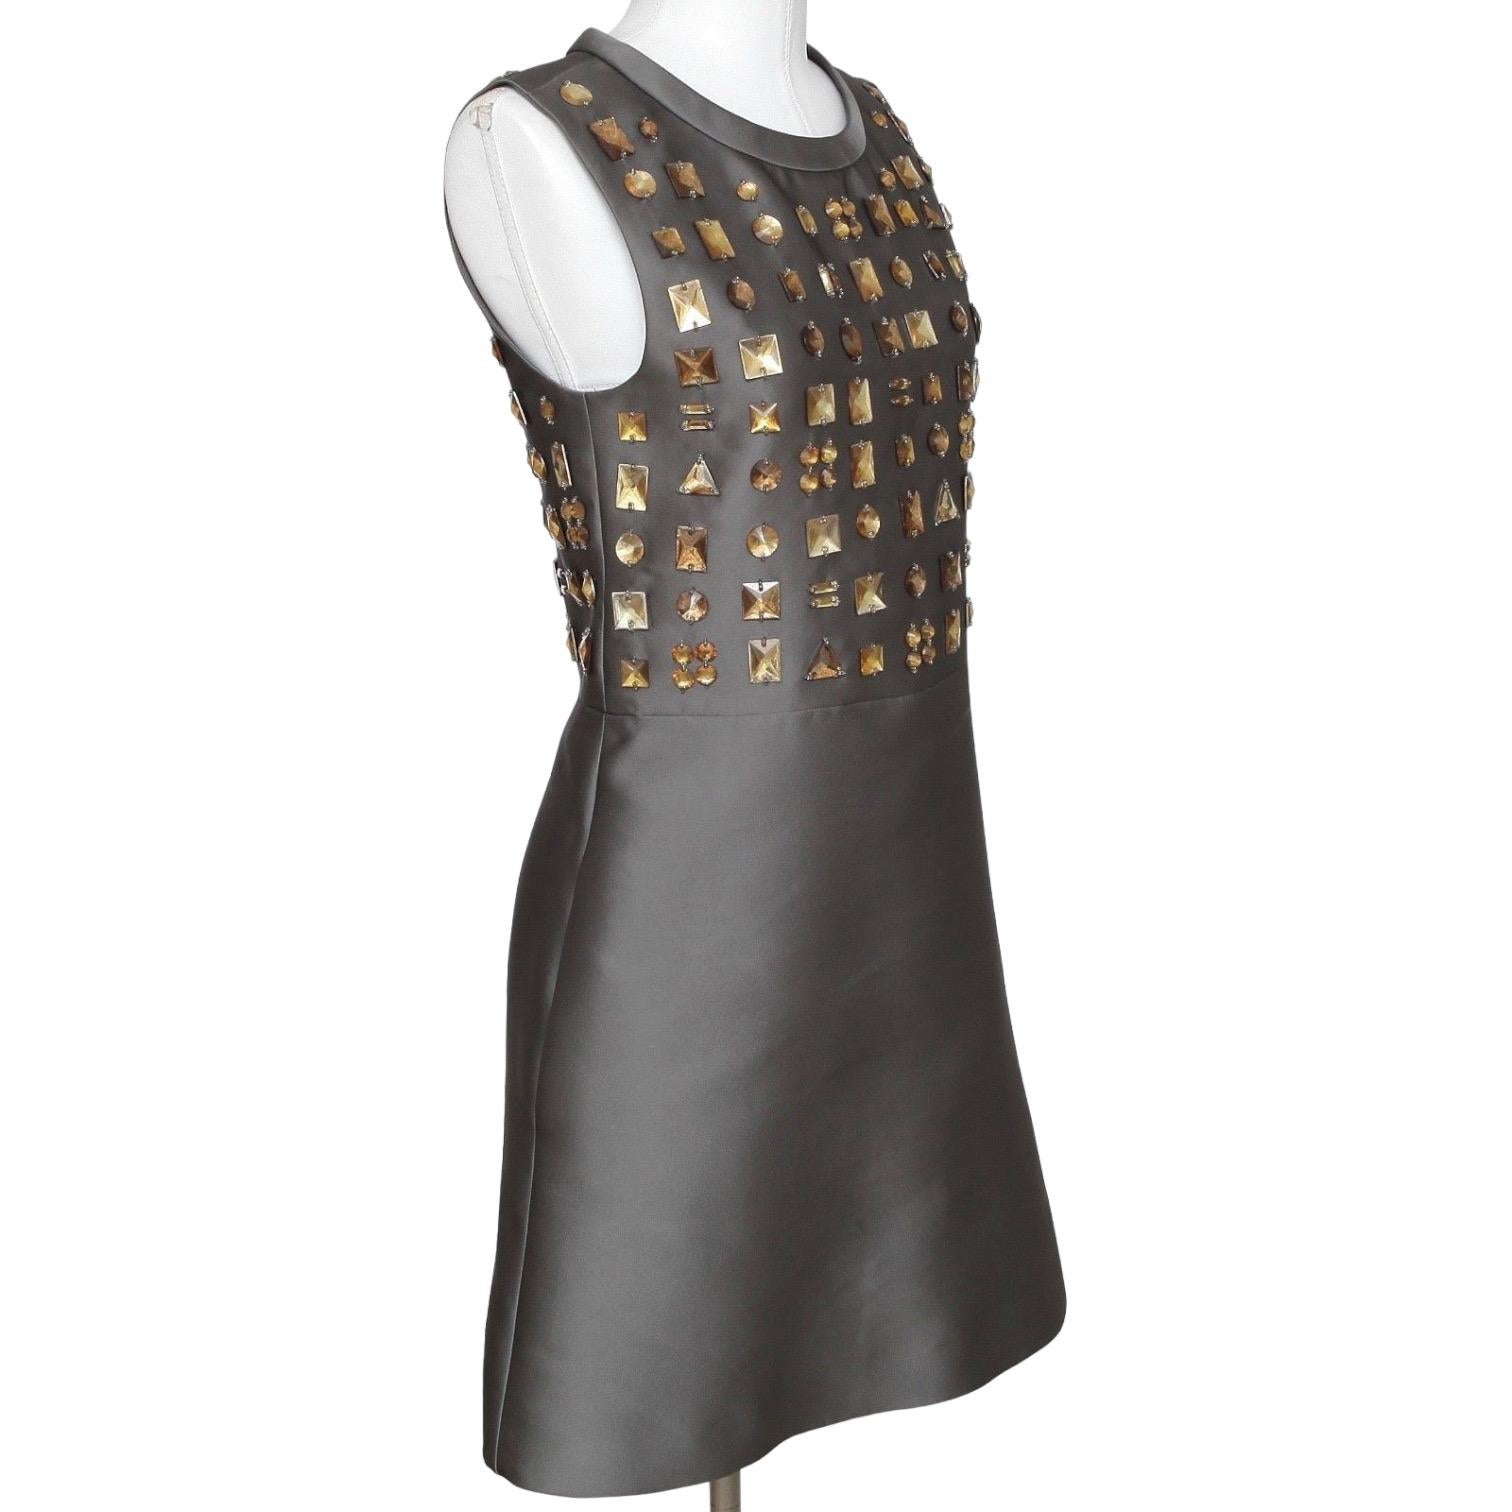 GUARANTEED AUTHENTIC CHLOE 2011 COLLECTION EMBELLISHED SLEEVELESS DRESS

Details:
• Stunning A-line sleeveless dress in a metallic grey color.
• Antiqued embellishments at top of dress.
• Crew neckline.
• Concealed rear zipper.
• Fully